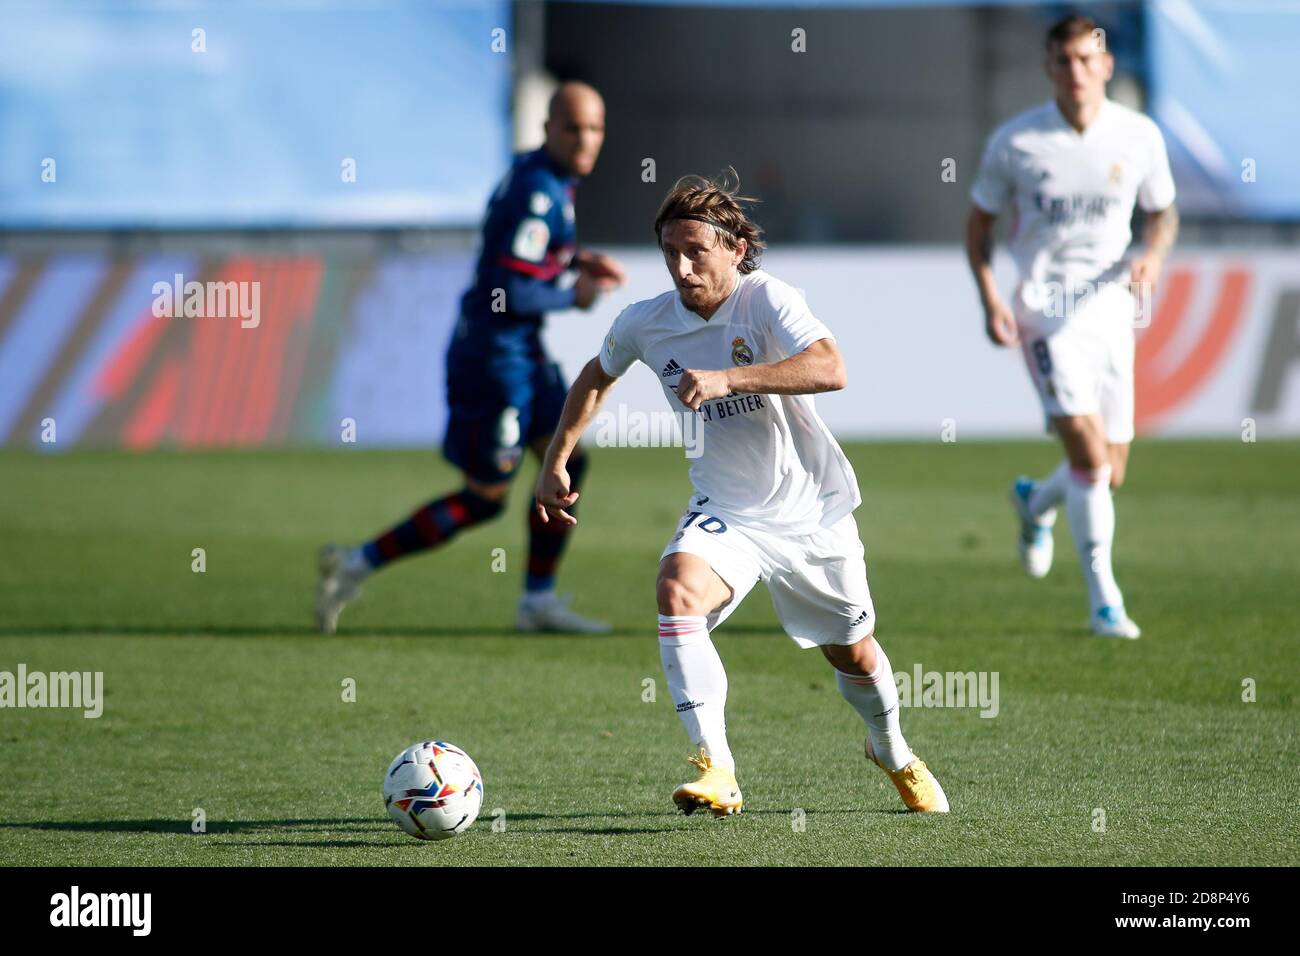 Madrid, Spain. 31st October, 2020. Luka Modric of Real Madrid in action during the Spanish championship La Liga football match between Real Madrid and SD Huesca on October 31, 2020 at Alfredo Di Stefano stadium in Valdebebas, Madrid, Spain - Photo Oscar J Barroso / Spain DPPI / DPPI Credit: LM/DPPI/Oscar Barroso/Alamy Live News Stock Photo